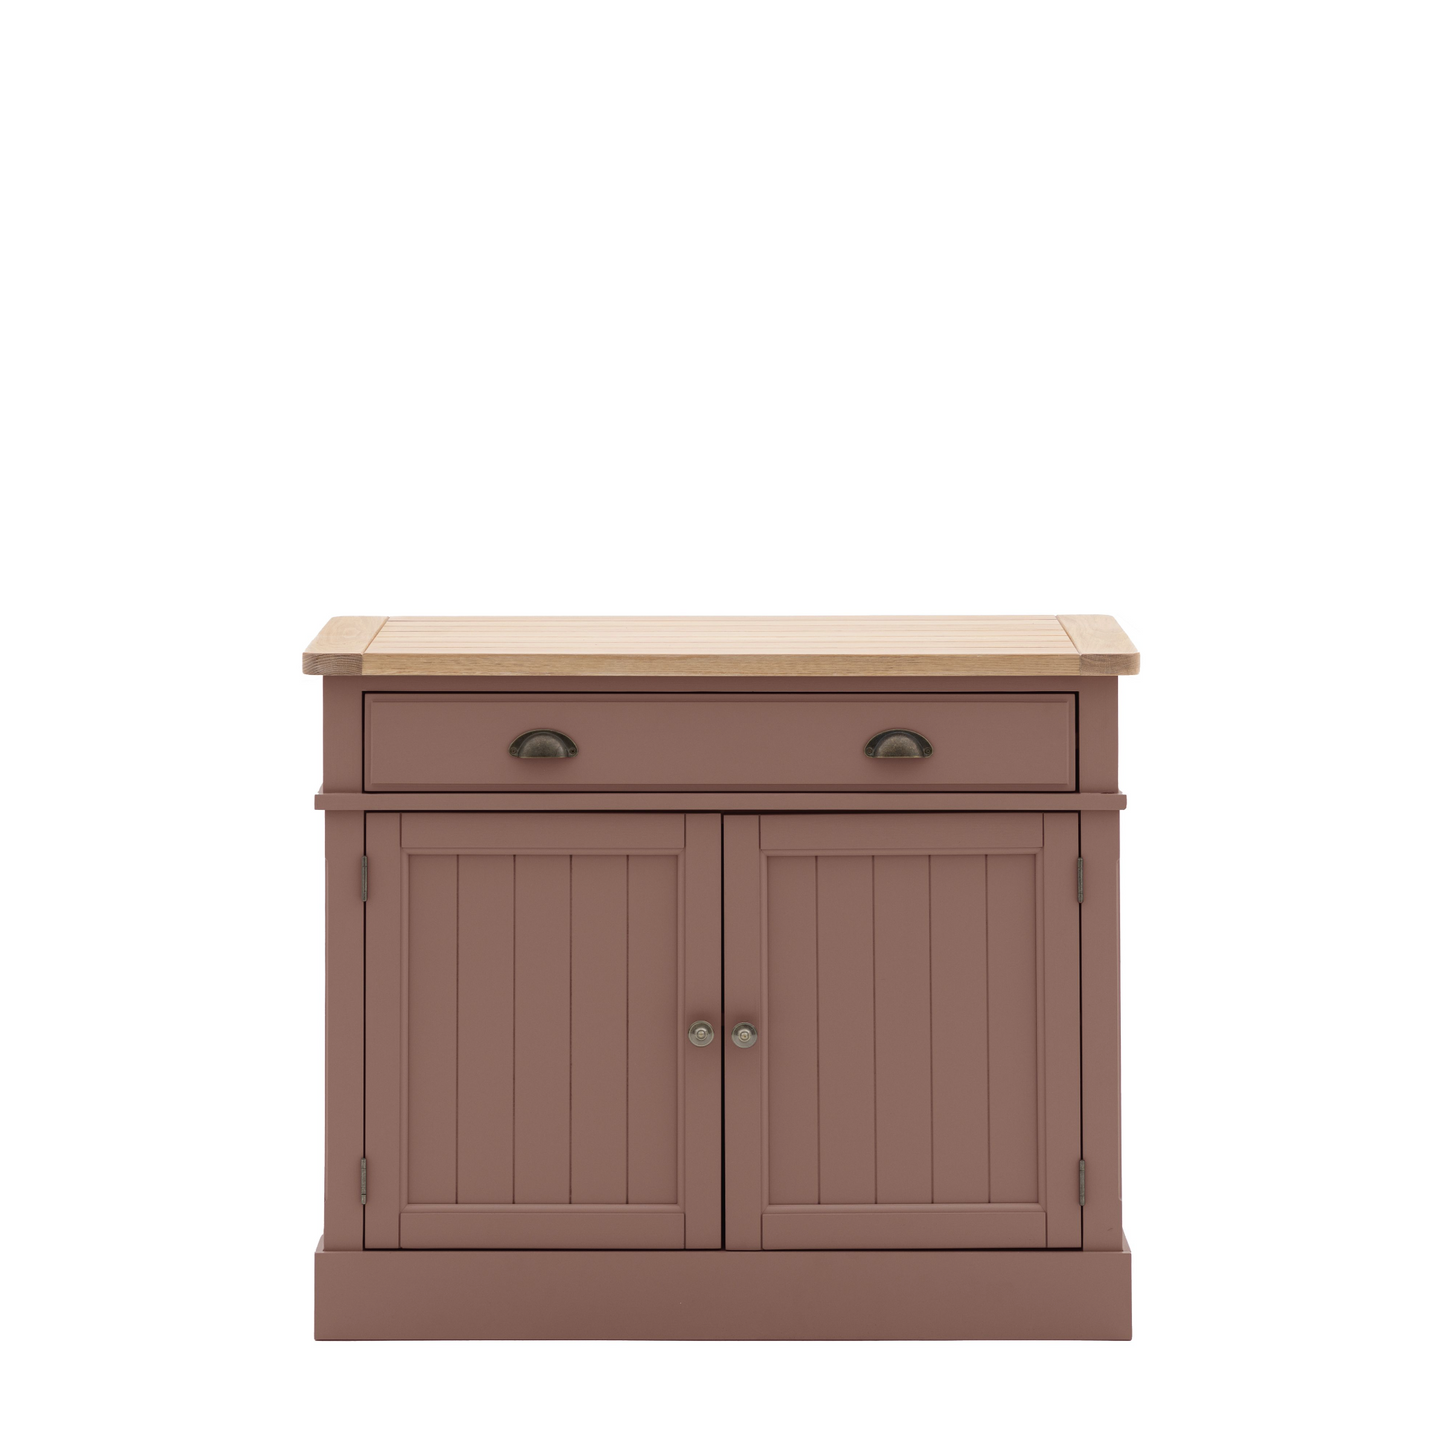 A Buckland Sideboard in Clay, with drawers and a wooden top, perfect for home furniture and interior decor.